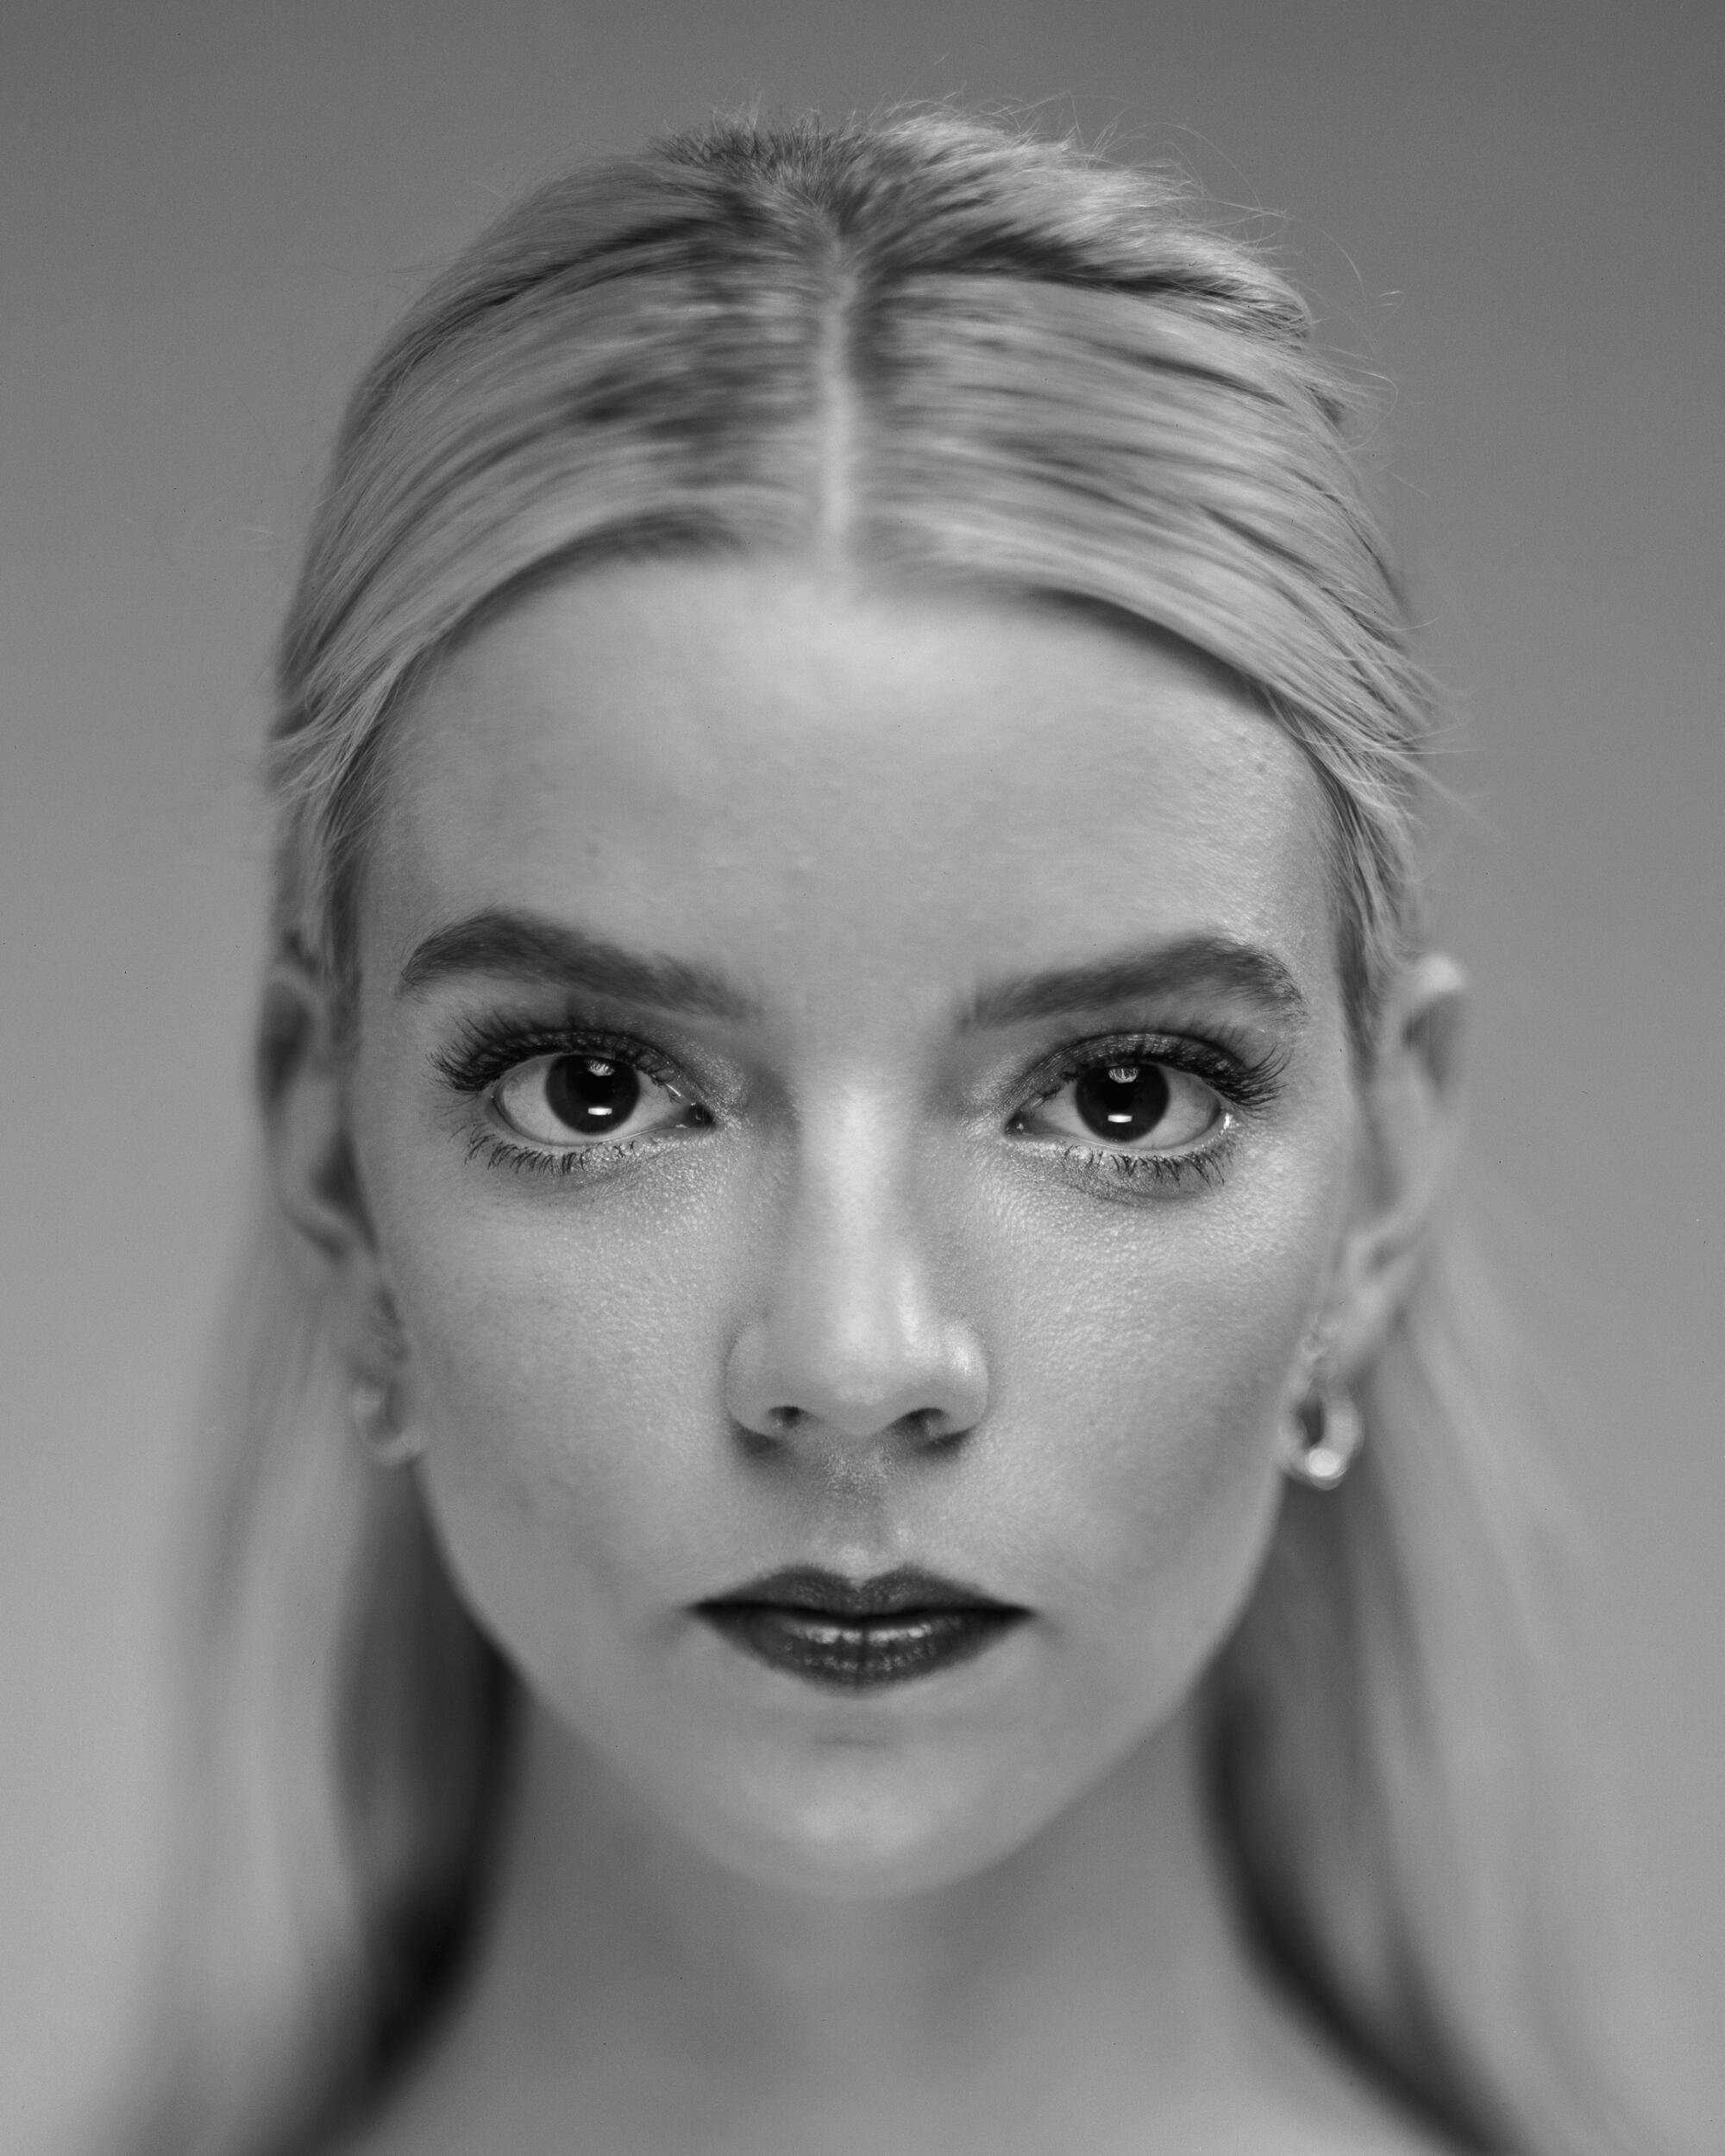 Anya Taylor-Joy looks straight ahead with a serious expression